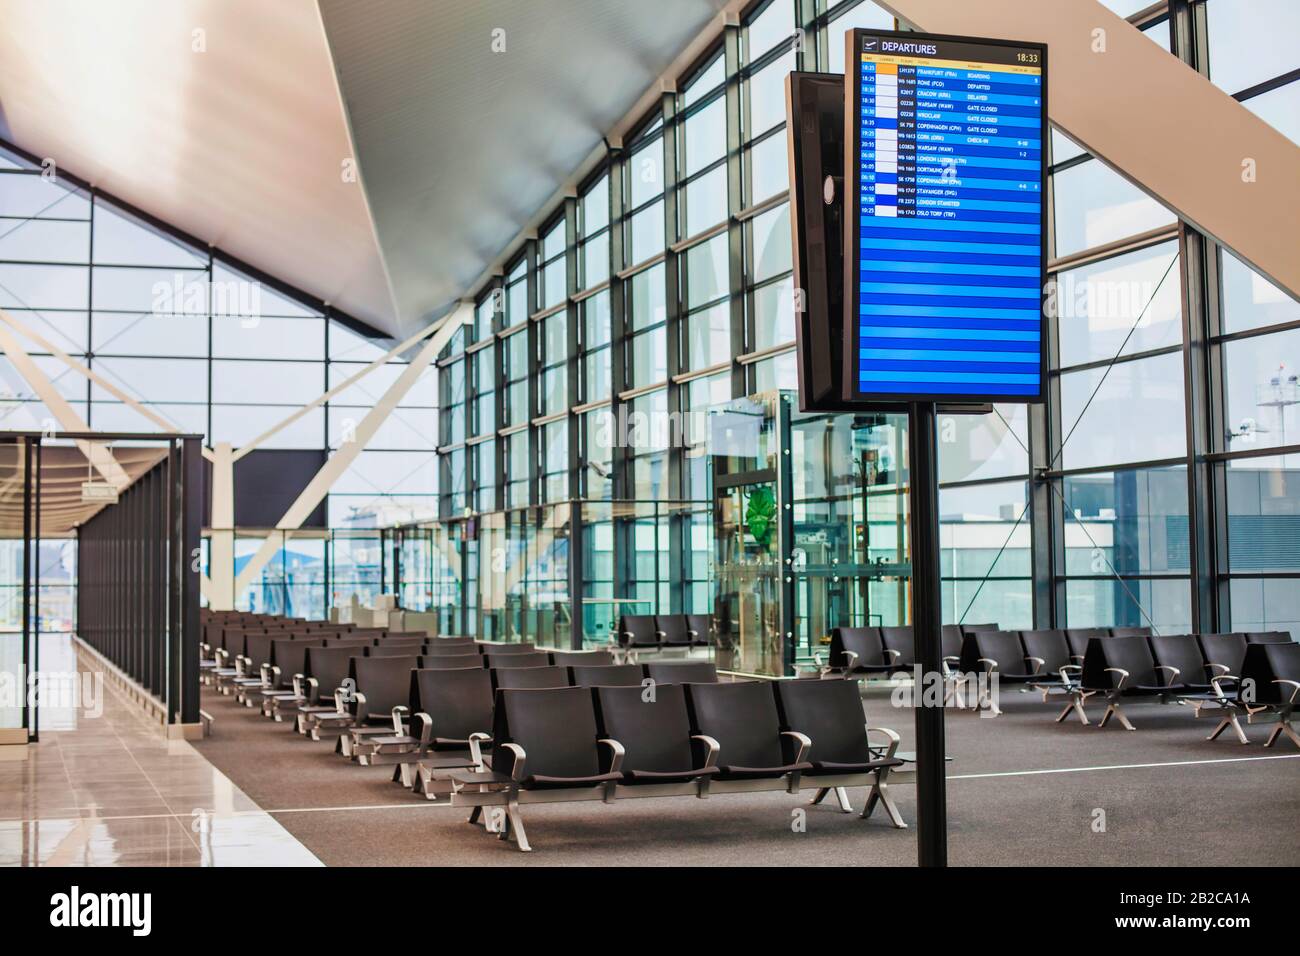 Flight display monitor in empty airport boarding gate Stock Photo